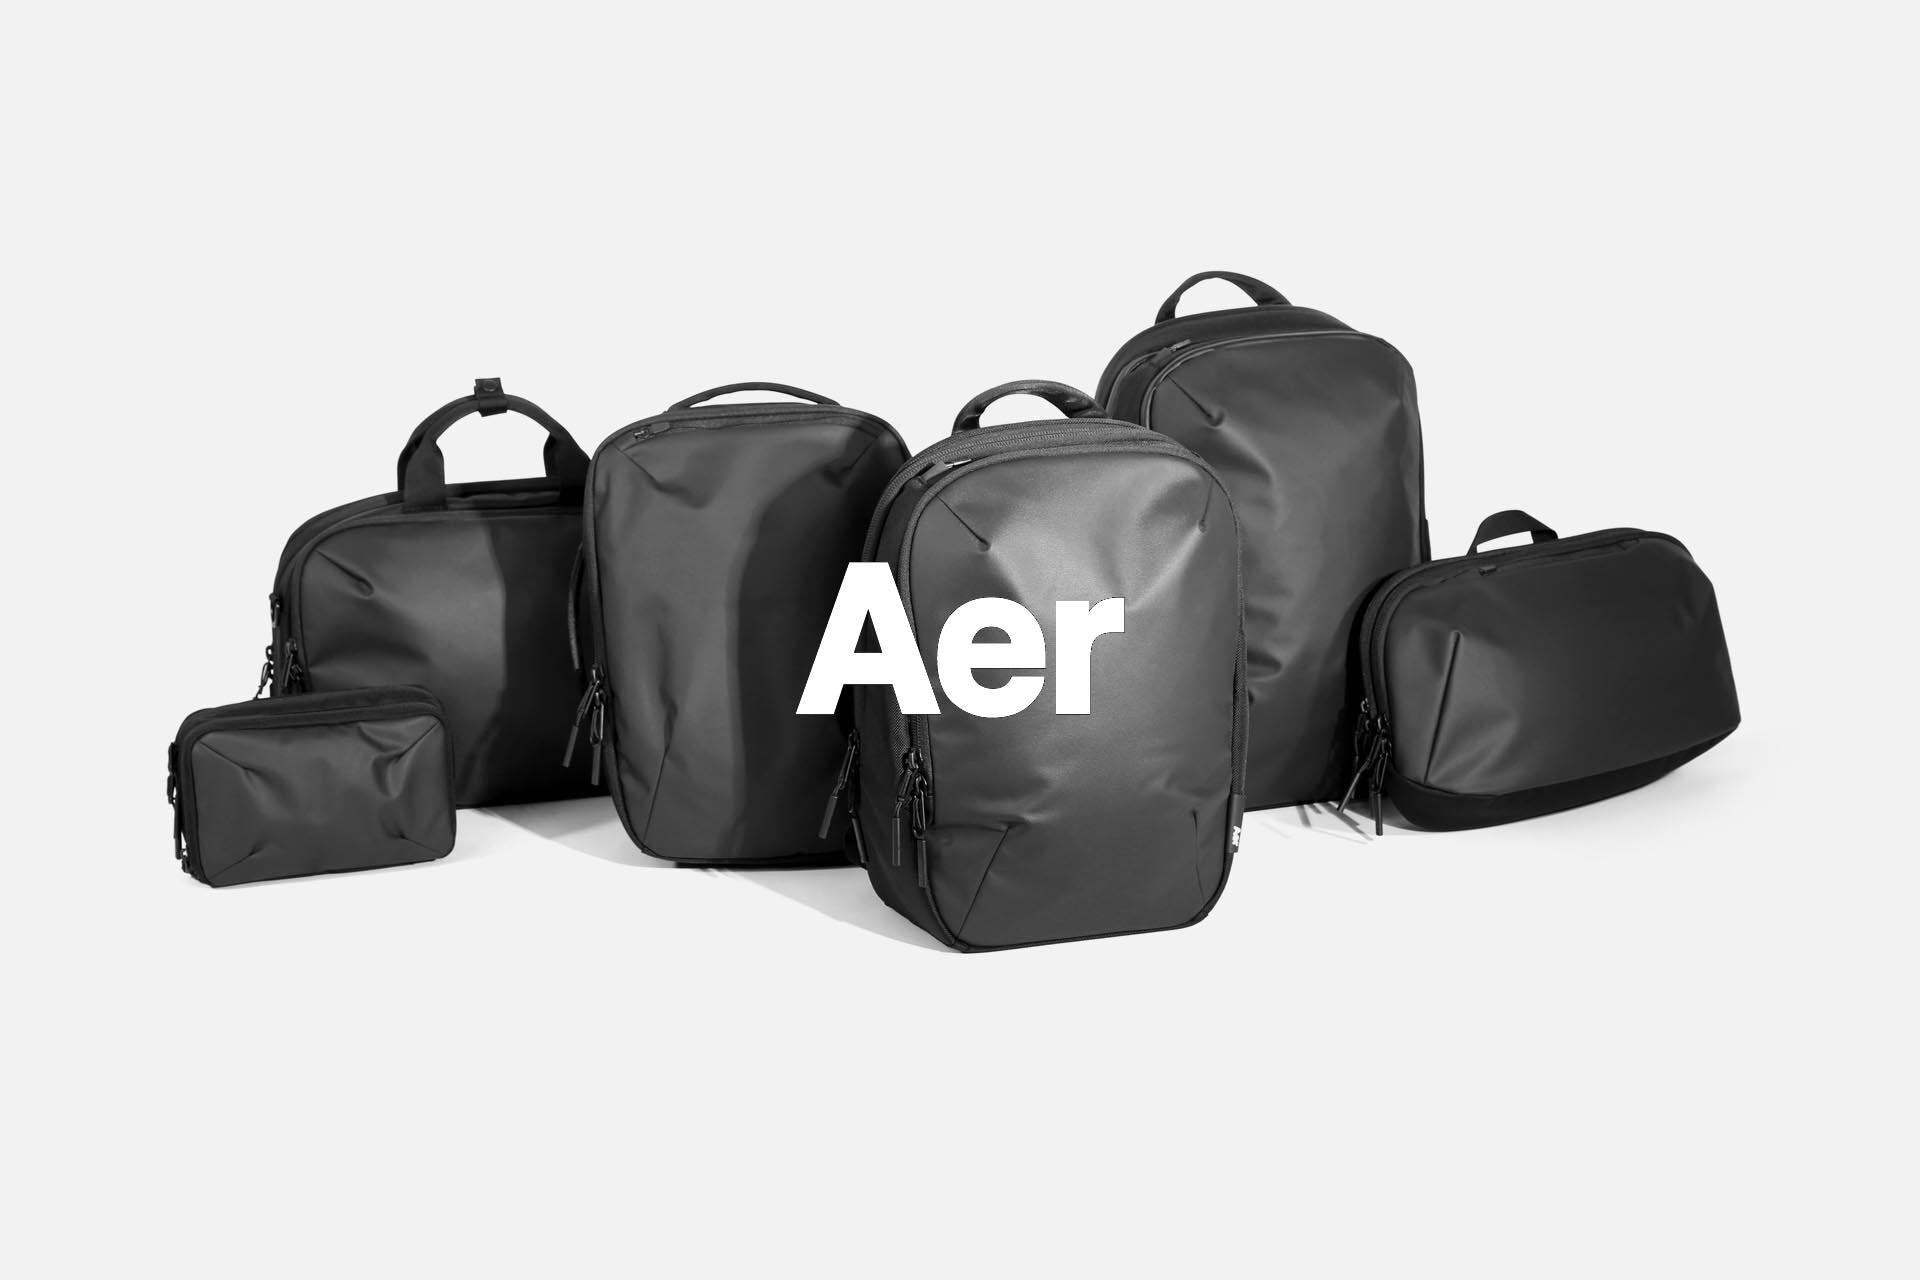 Aer SS20 Work Collection | Day Pack 2 vs Day Pack Gen 1